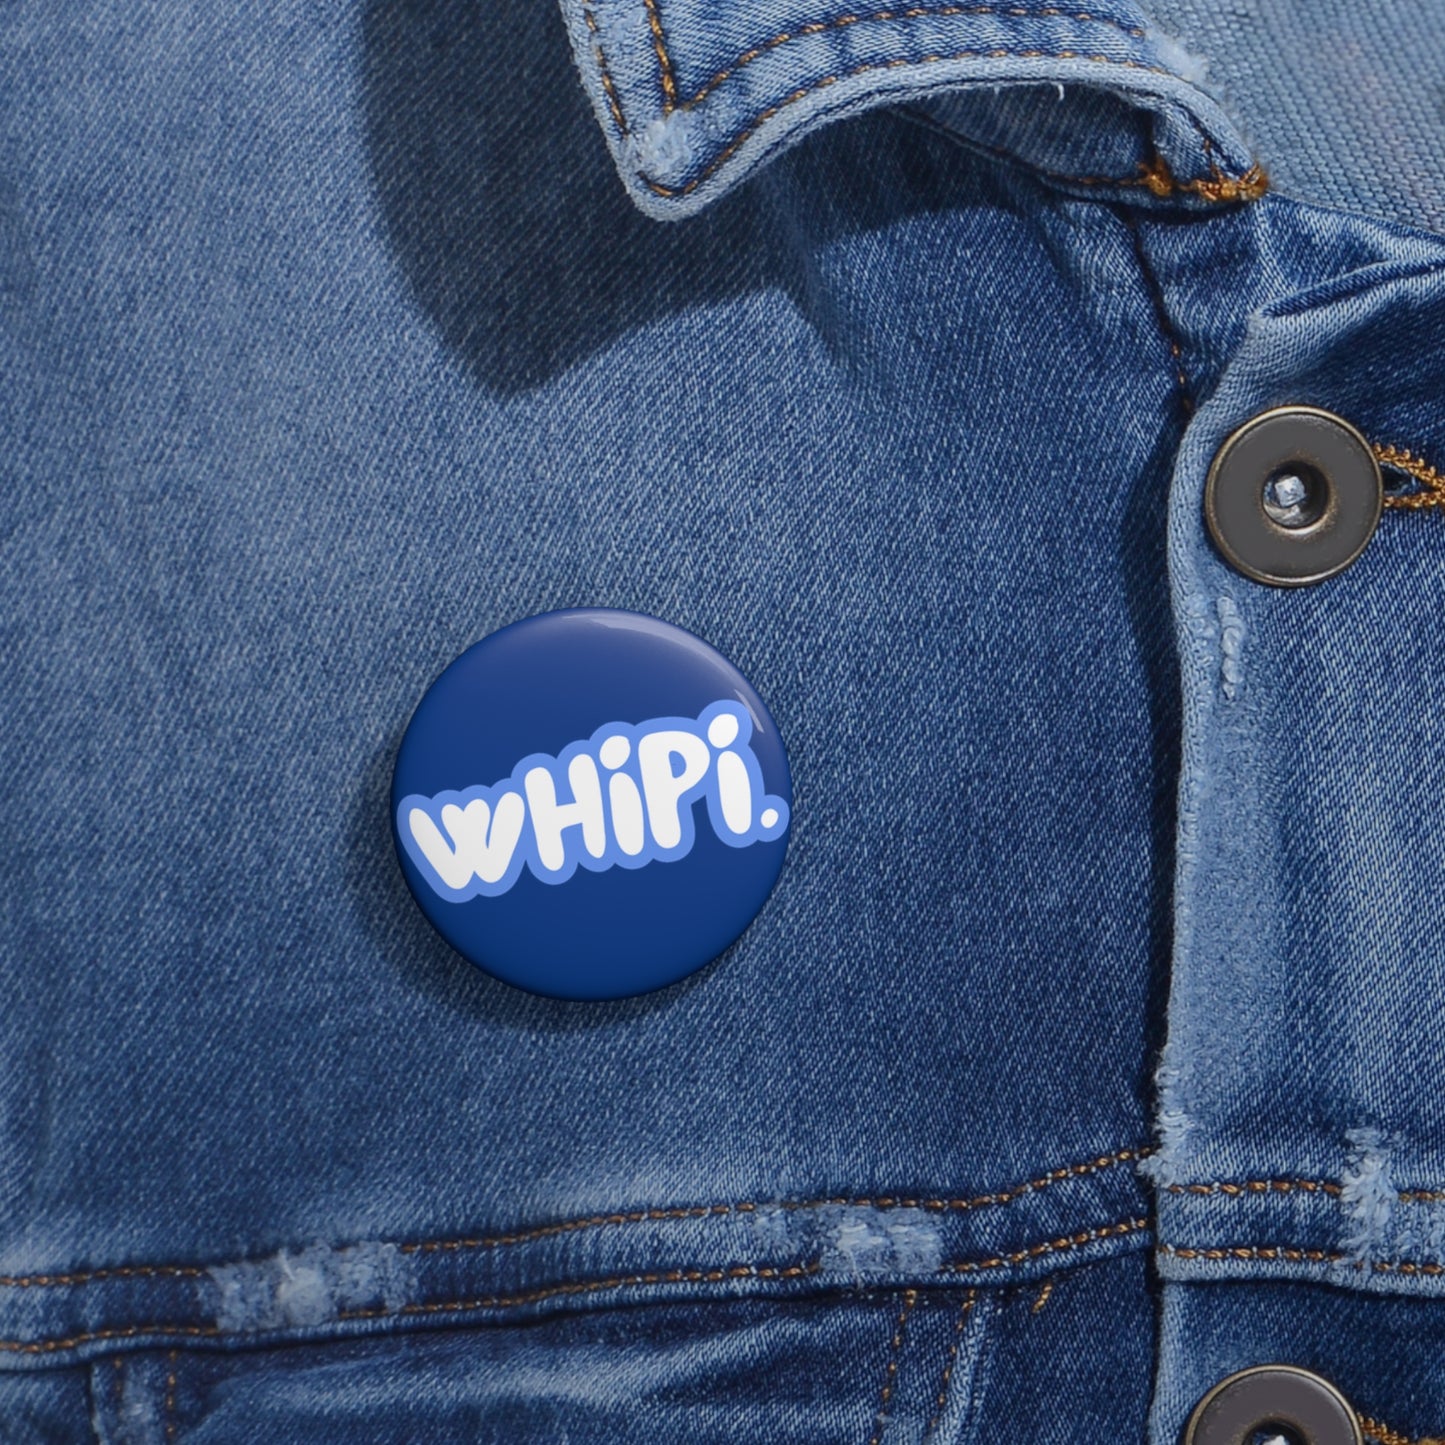 wHiPi. Pin Buttons